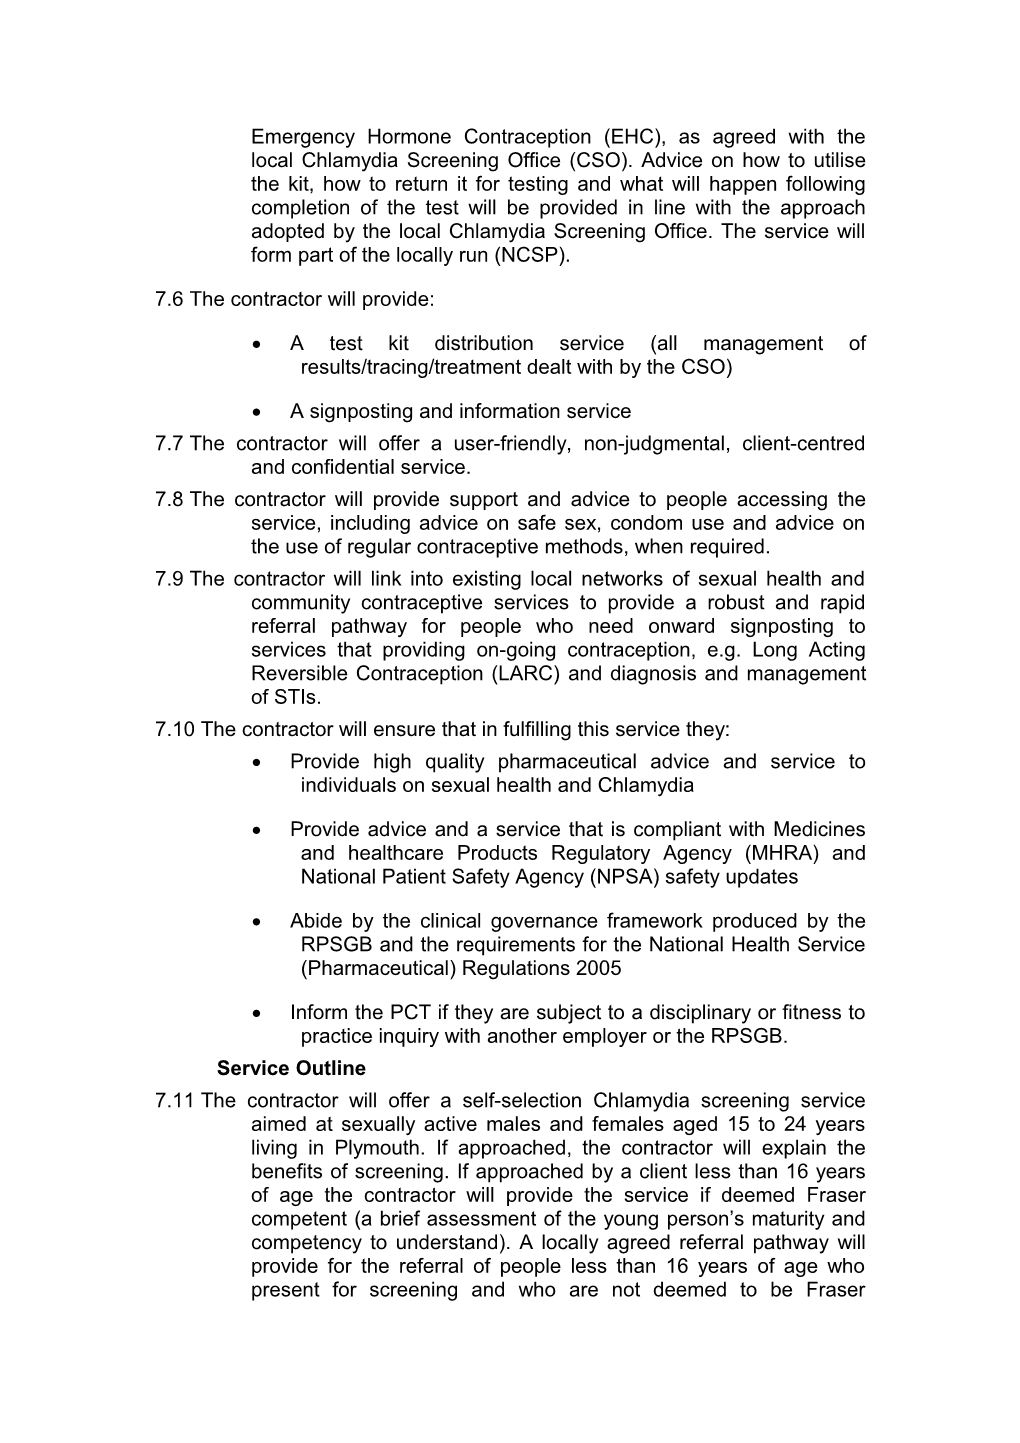 Service Level Agreement for Pharmacy Contractor Provision of a Chlamydia Screening Support